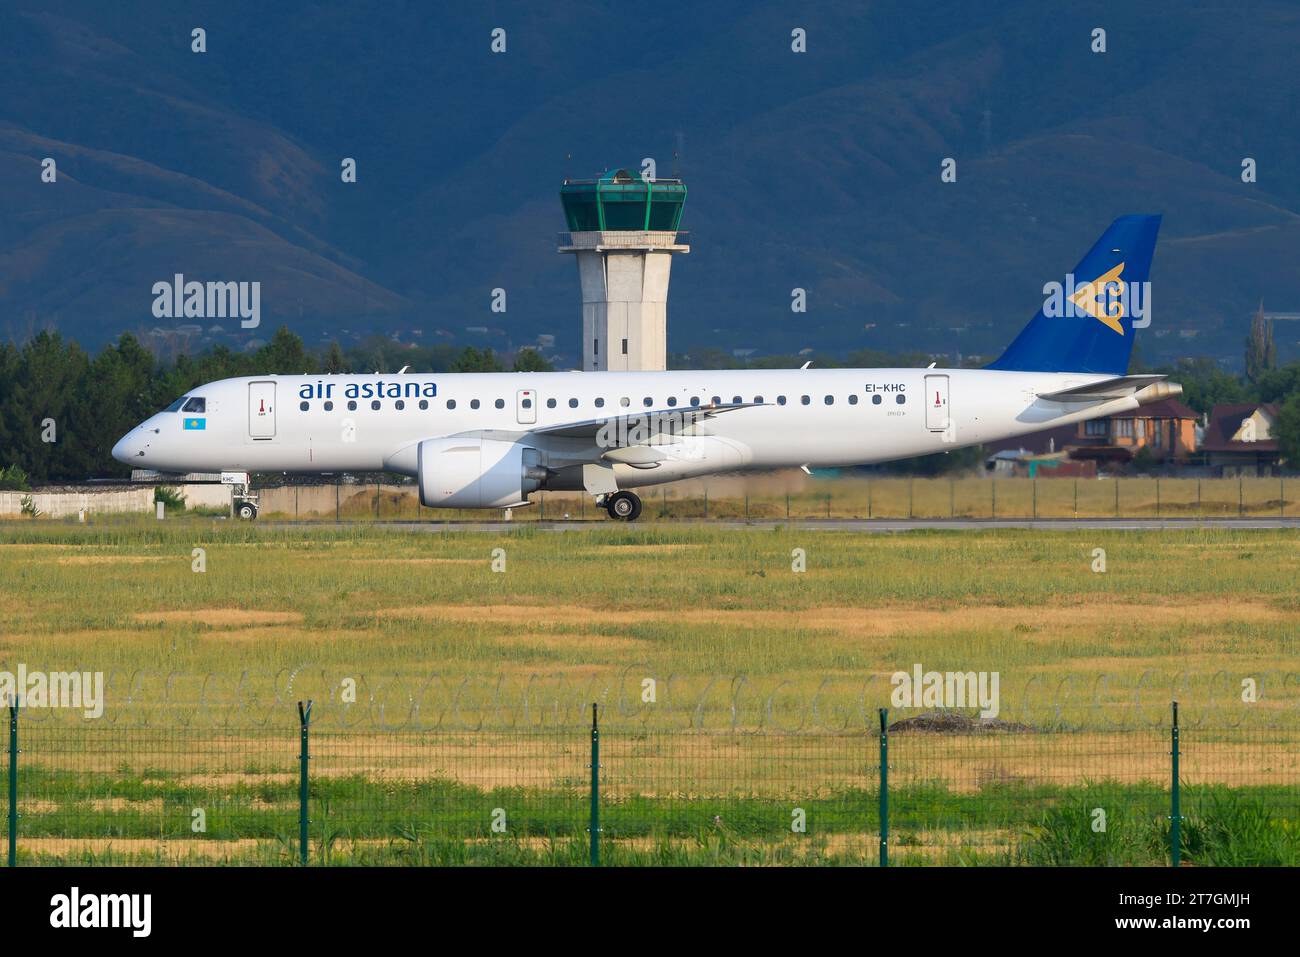 Aircraft of Air Astana Embraer 190 E2 taxiing. New airplane Embraer E190-E2 of Air Astana. Plane of AirAstana Embraer. Stock Photo